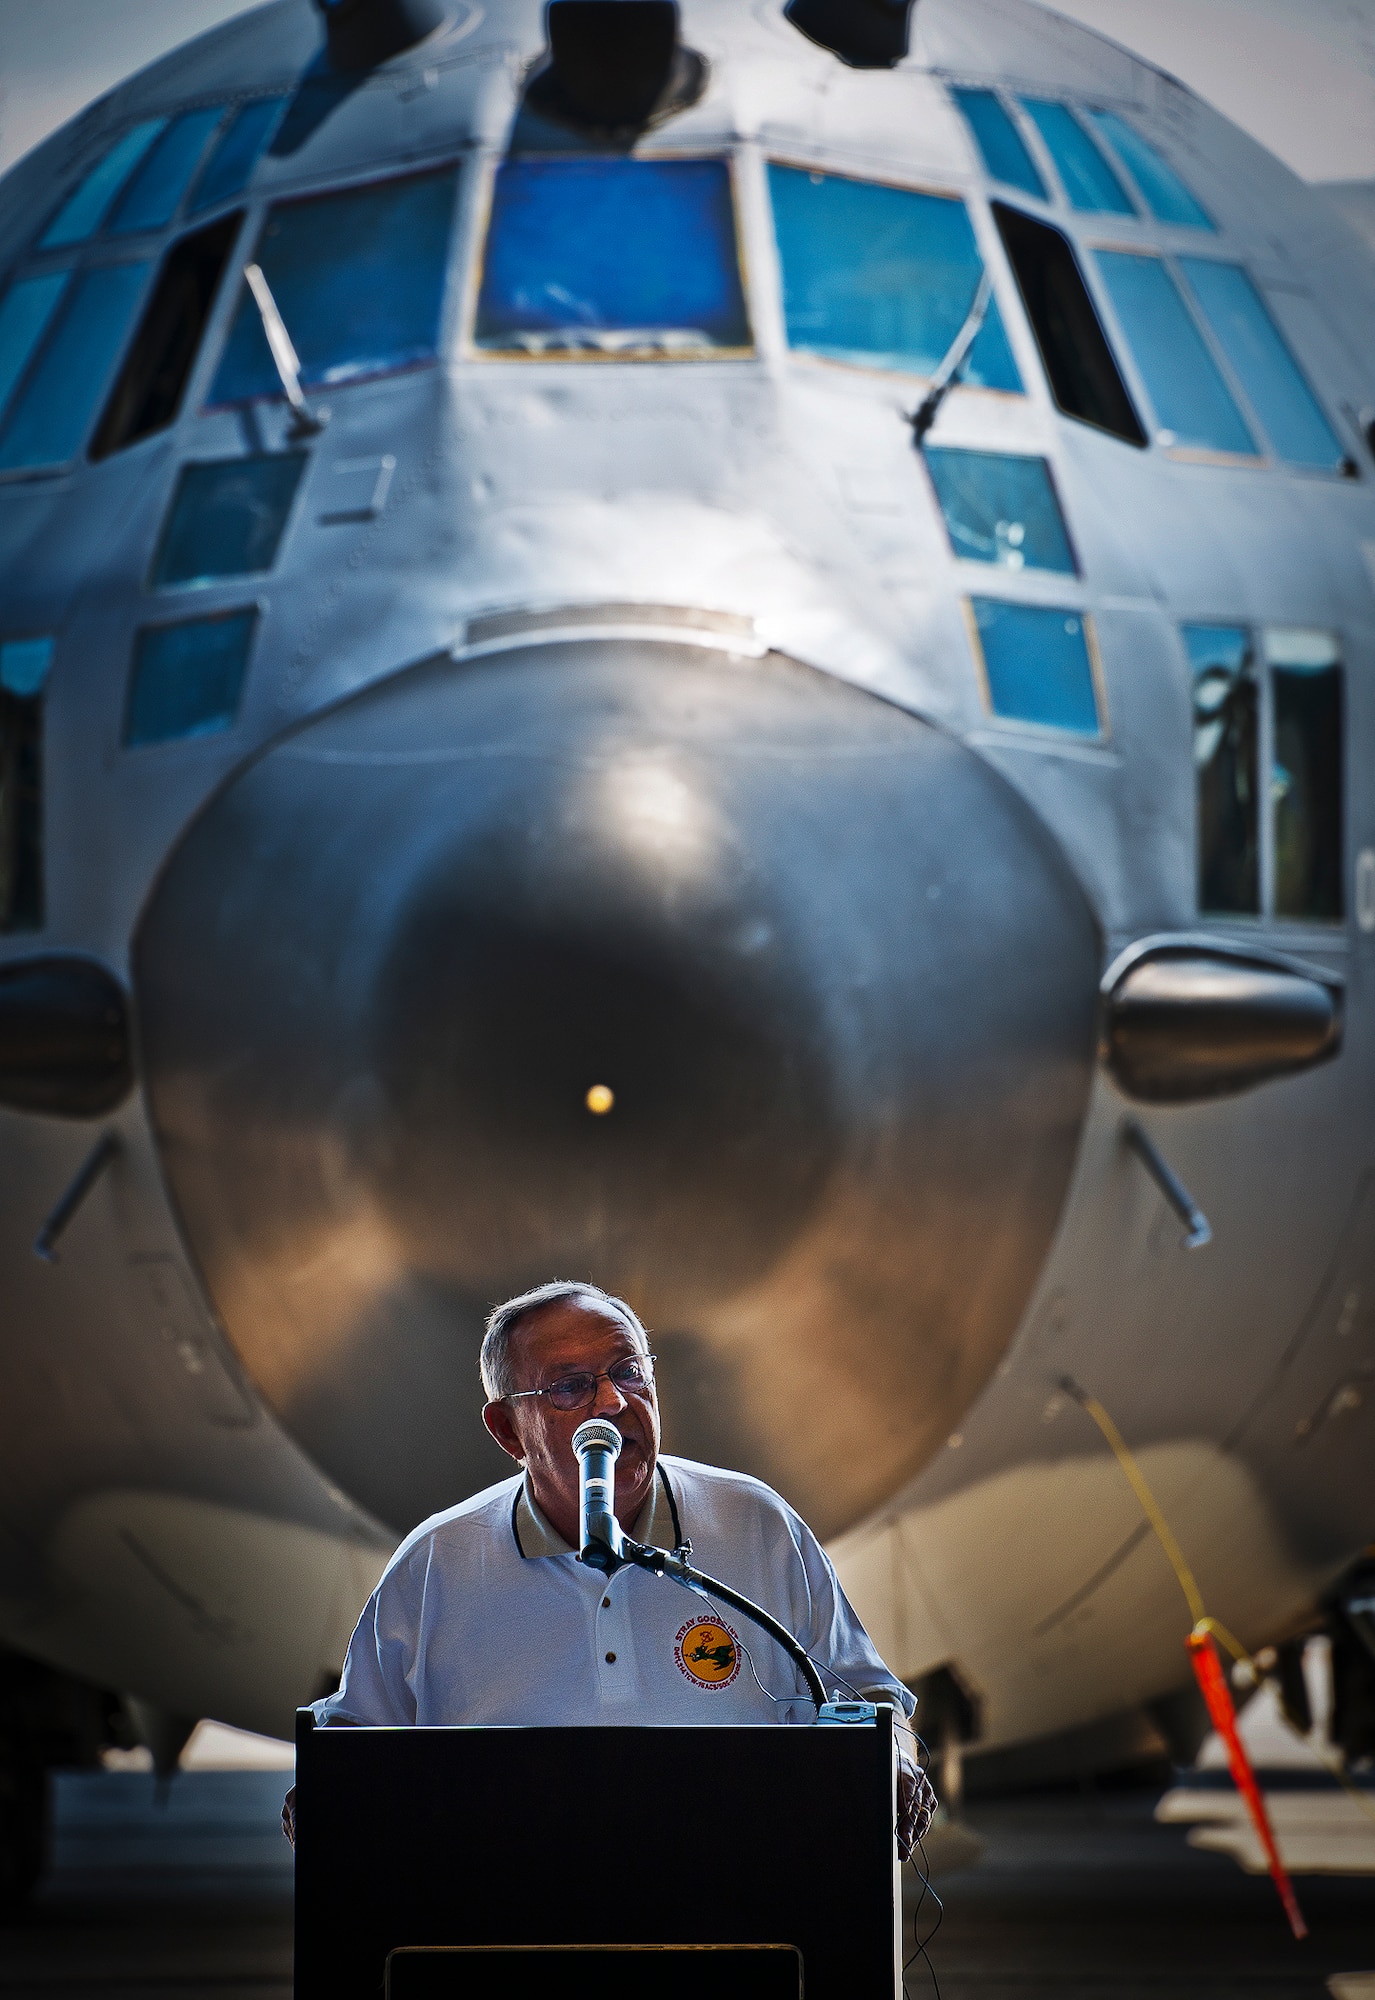 Retired Col. Ray Turczynski, former 1st Special Operations Squadron commander and MC-130E Combat Talon I pilot, speaks at the retirement ceremony for the aircraft at Duke Field, Fla., April 25.  Turcynski spoke about 1980’s Operation Eagle Claw, the attempted mission to rescue hostages in Iran.  Aircrew, maintainers and many others turned out to remember and bid farewell to the Talon I on its official retirement from the Air Force.  The last five Talons, located at Duke Field, will be delivered to the “boneyard” at Davis-Monthan Air Force Base, N.M., by mid-May 2013.  (U.S. Air Force photo/Tech. Sgt. Samuel King Jr.)